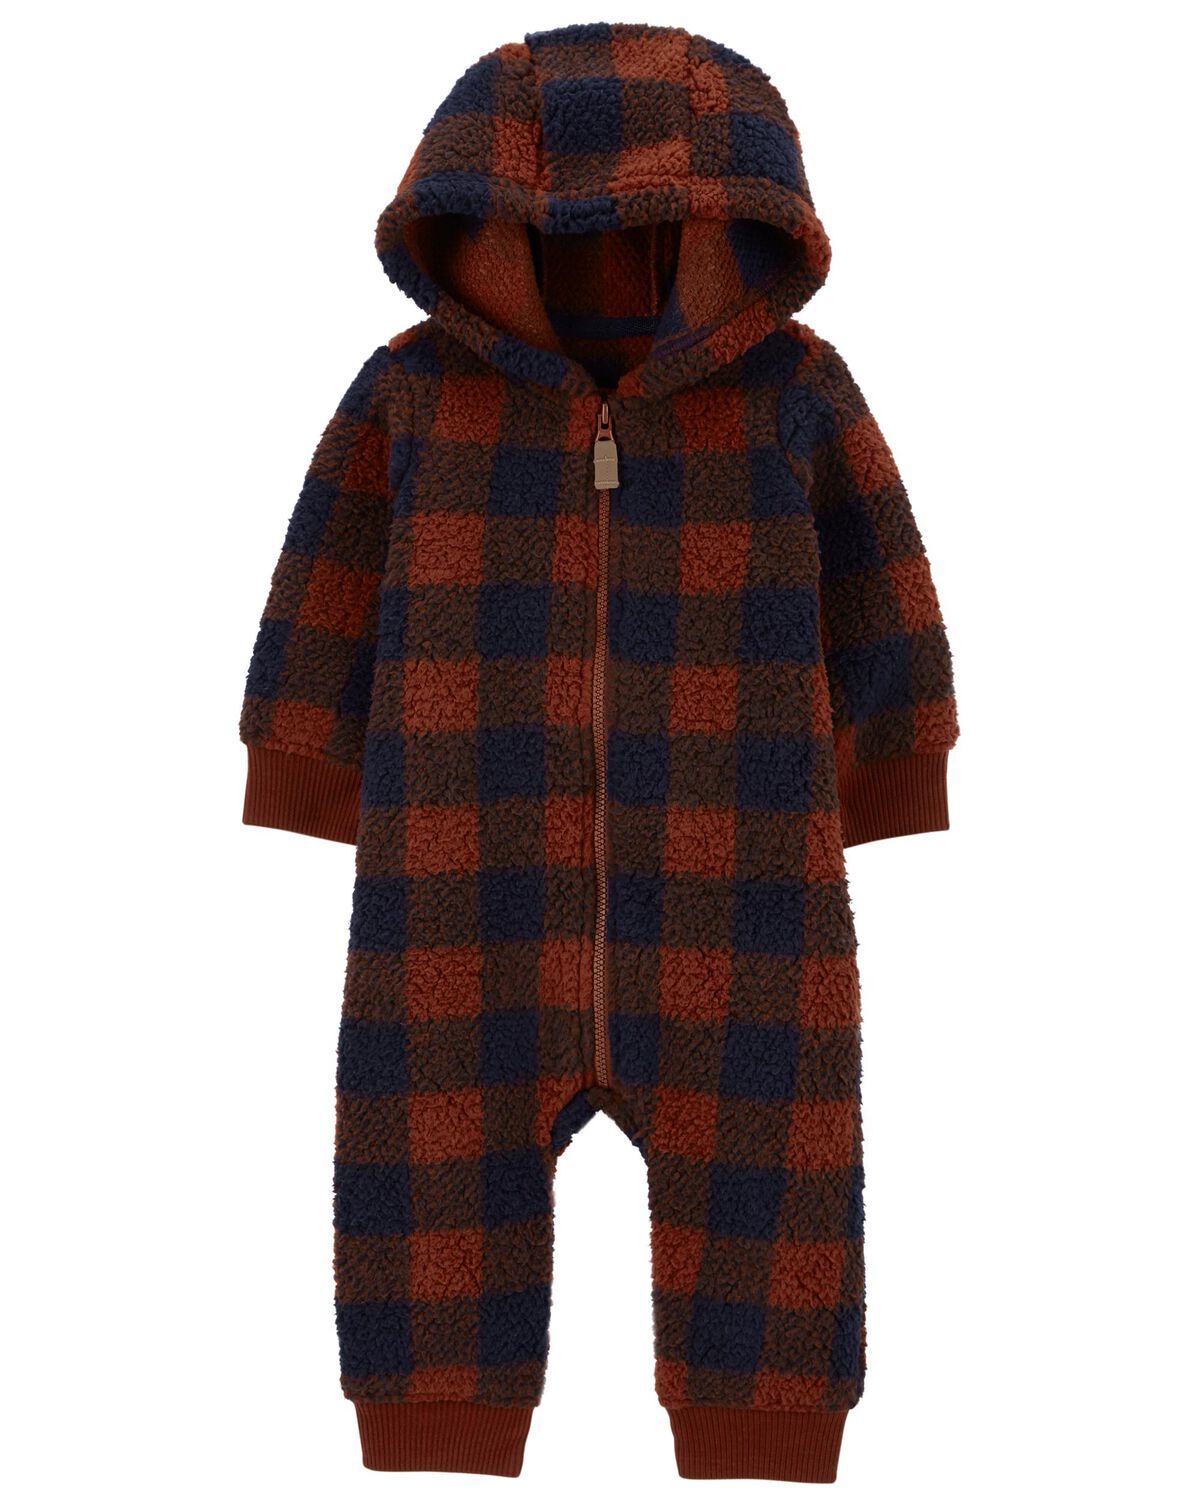 Navy/Red Baby Plaid Sherpa Jumpsuit | carters.com | Carter's